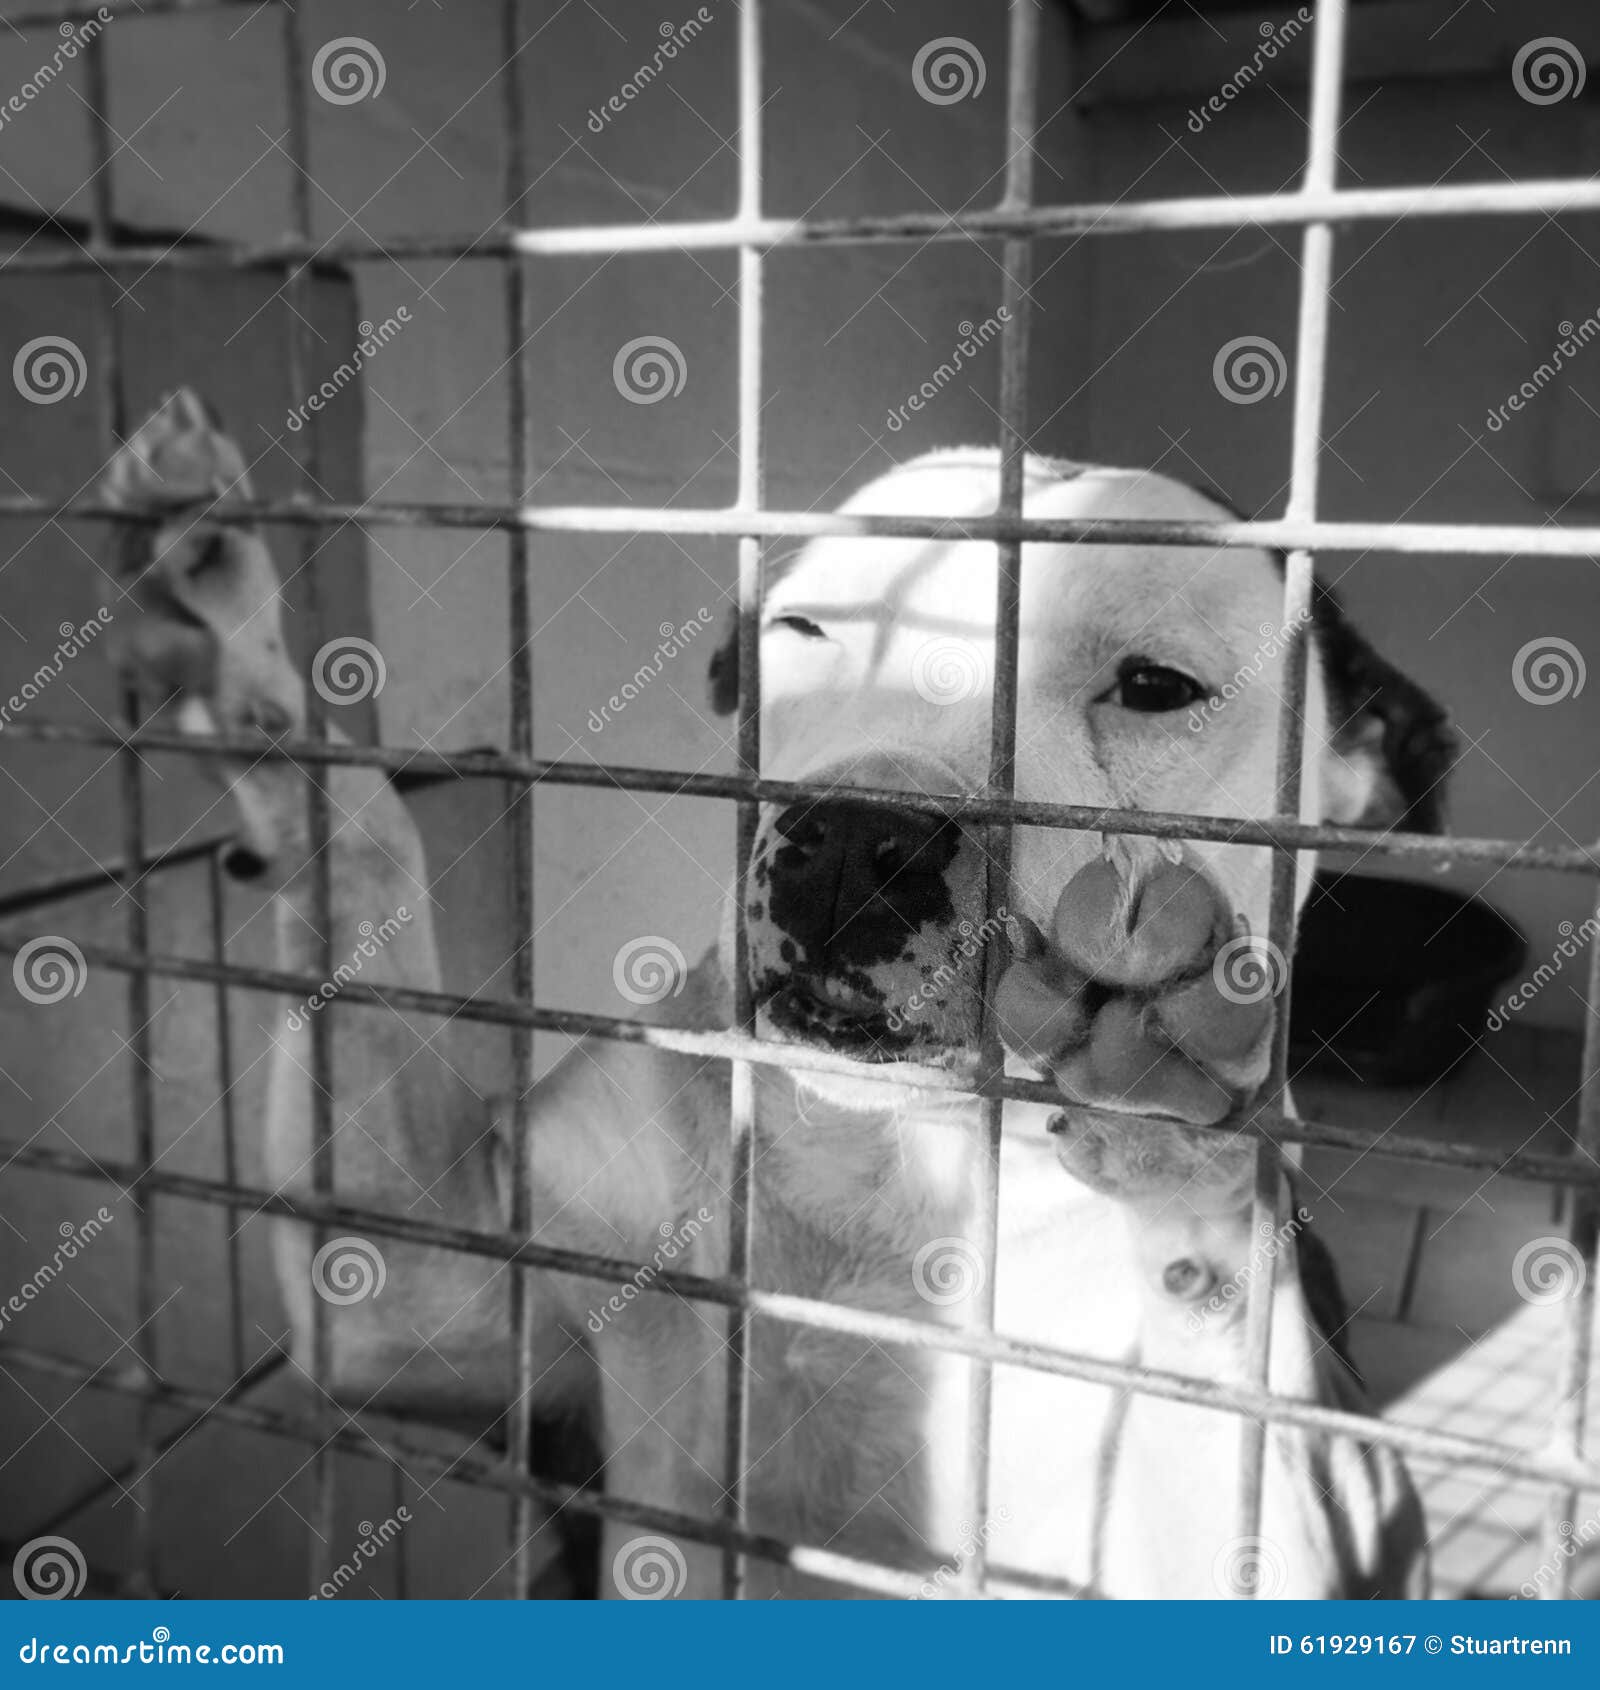 Sad Looking Dog in a Kennel at an Animal Rescue Shelter Stock Image ...